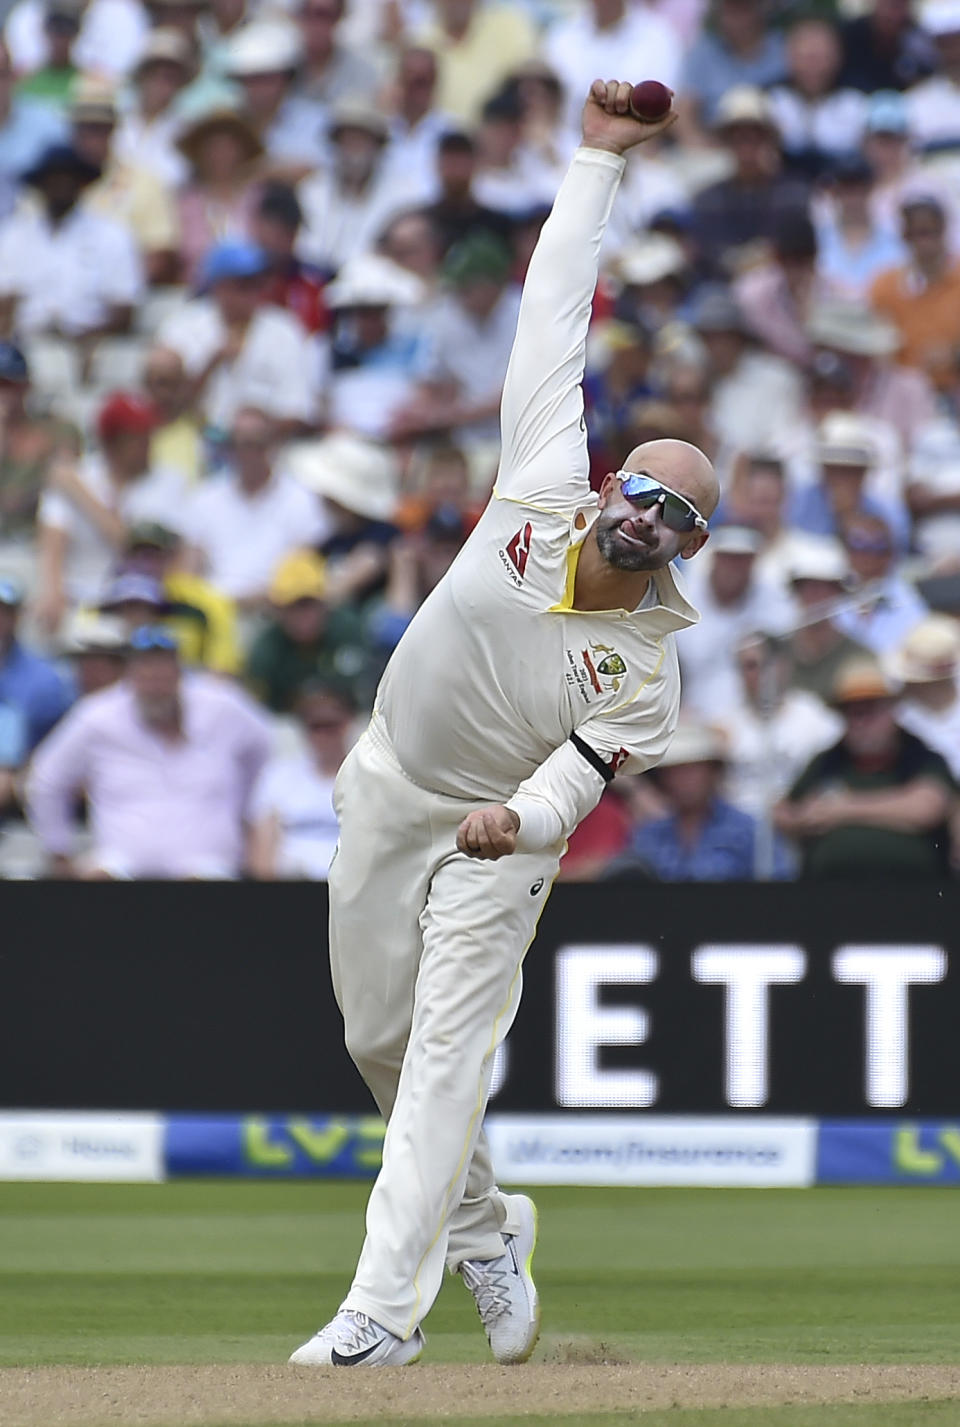 Australia's Nathan Lyon bowls on day one of the first Ashes Test cricket match between England and Australia at Edgbaston, Birmingham, England, Friday, June 16, 2023. (AP Photo/Rui Vieira)